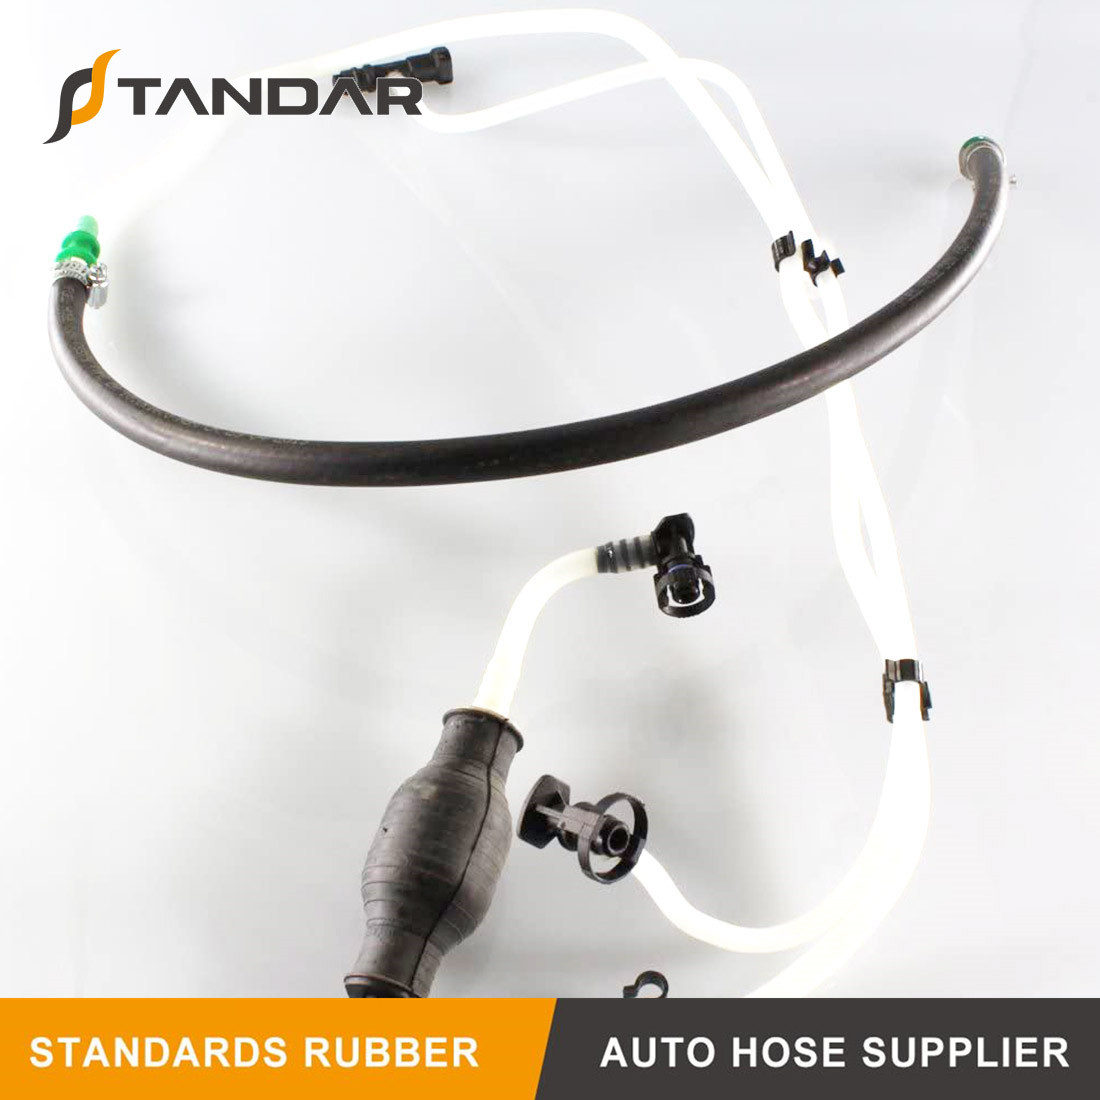 7700111932 8200050395 8200360597 rubber braided submersible outboard flexible automative diesel Fuel Line With Hand Pump For Renault Kangoo